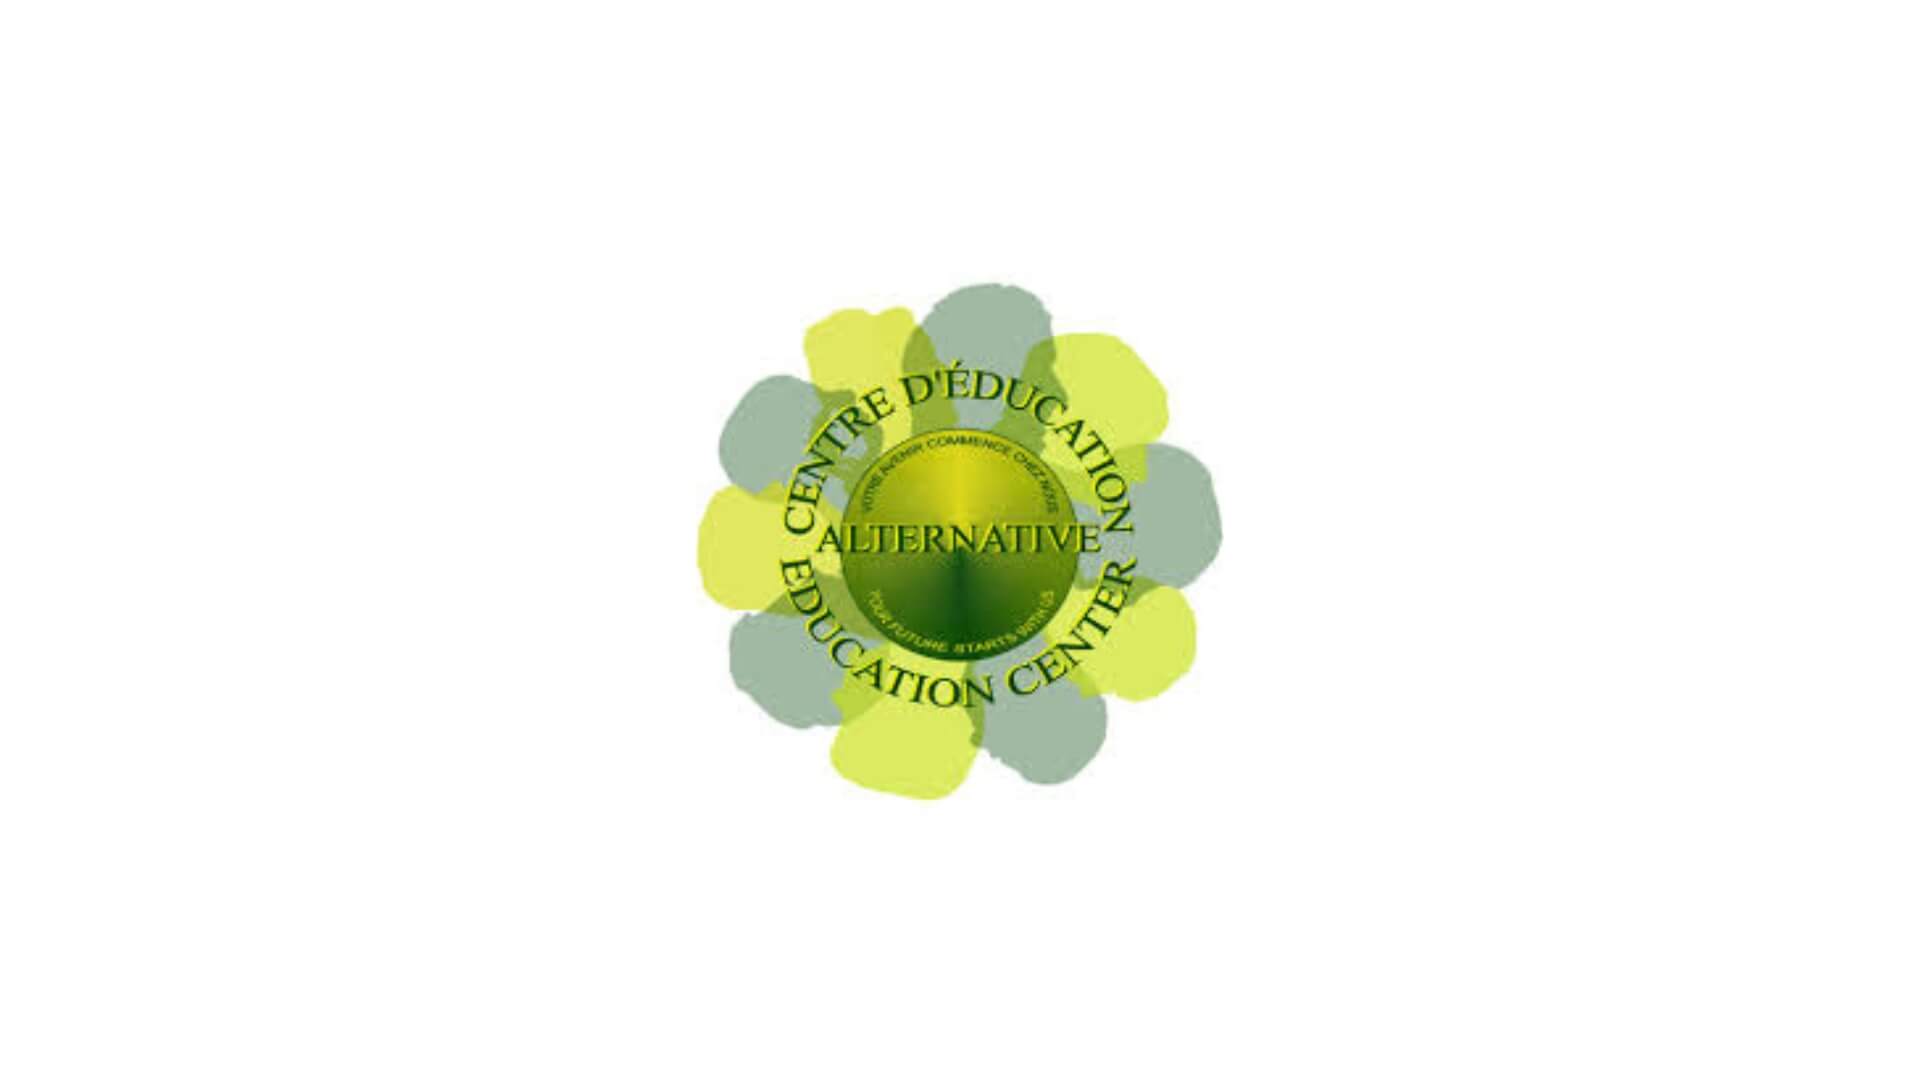 Timmins Care Logo of the centre de éducation alternative, featuring a green and yellow flower-like design with text encircling the center. Cochrane District Social Services Administration Board